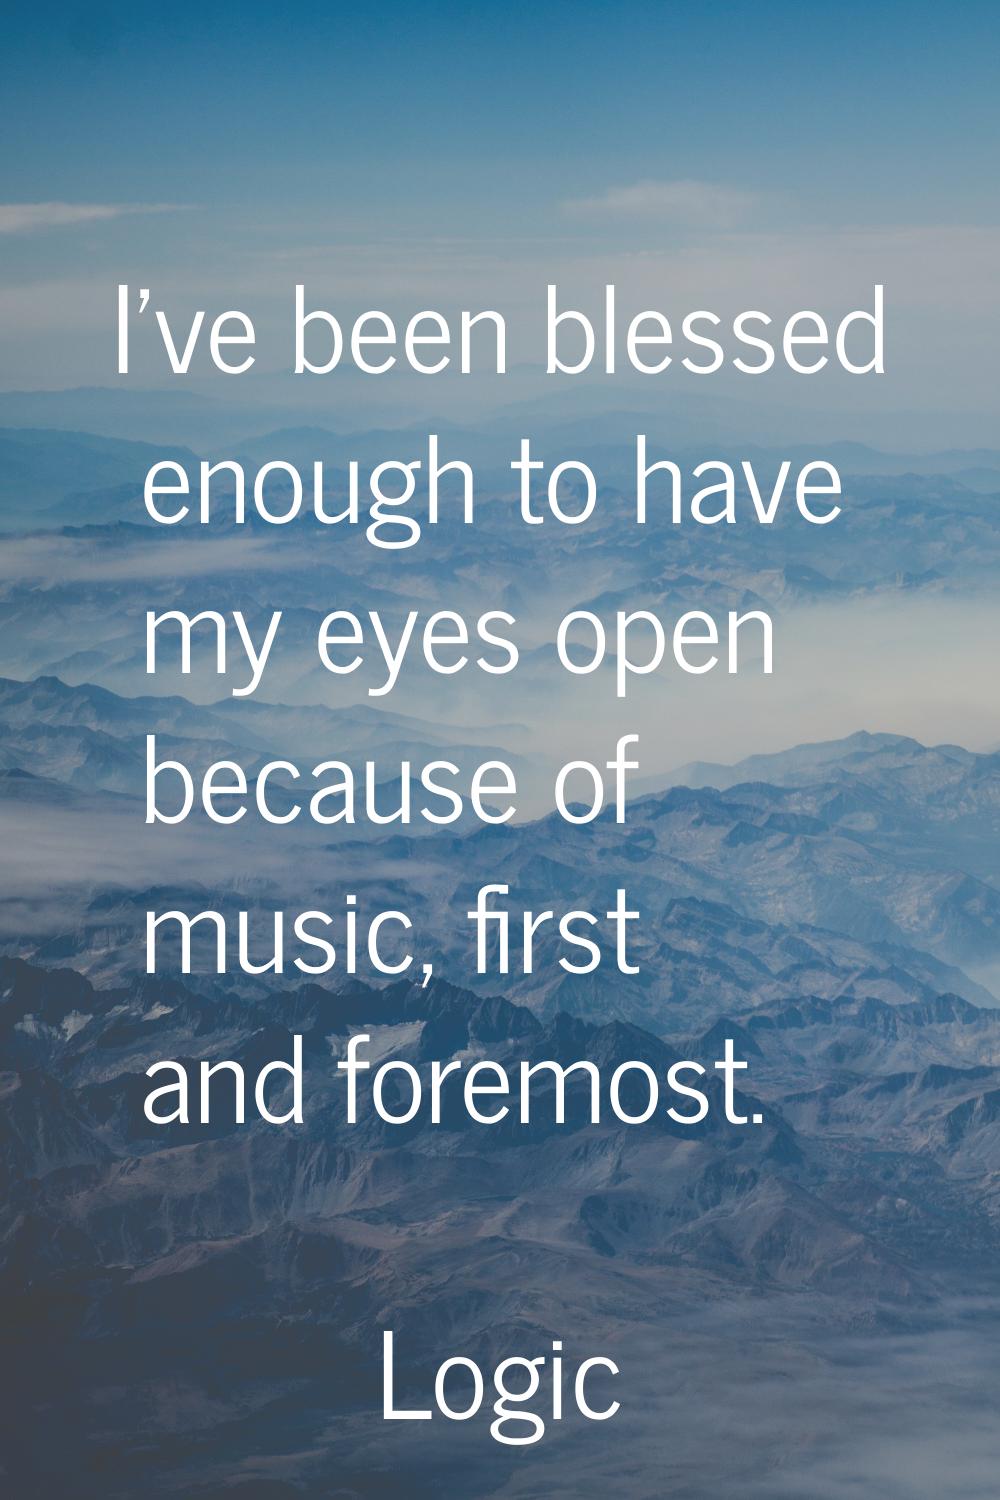 I've been blessed enough to have my eyes open because of music, first and foremost.